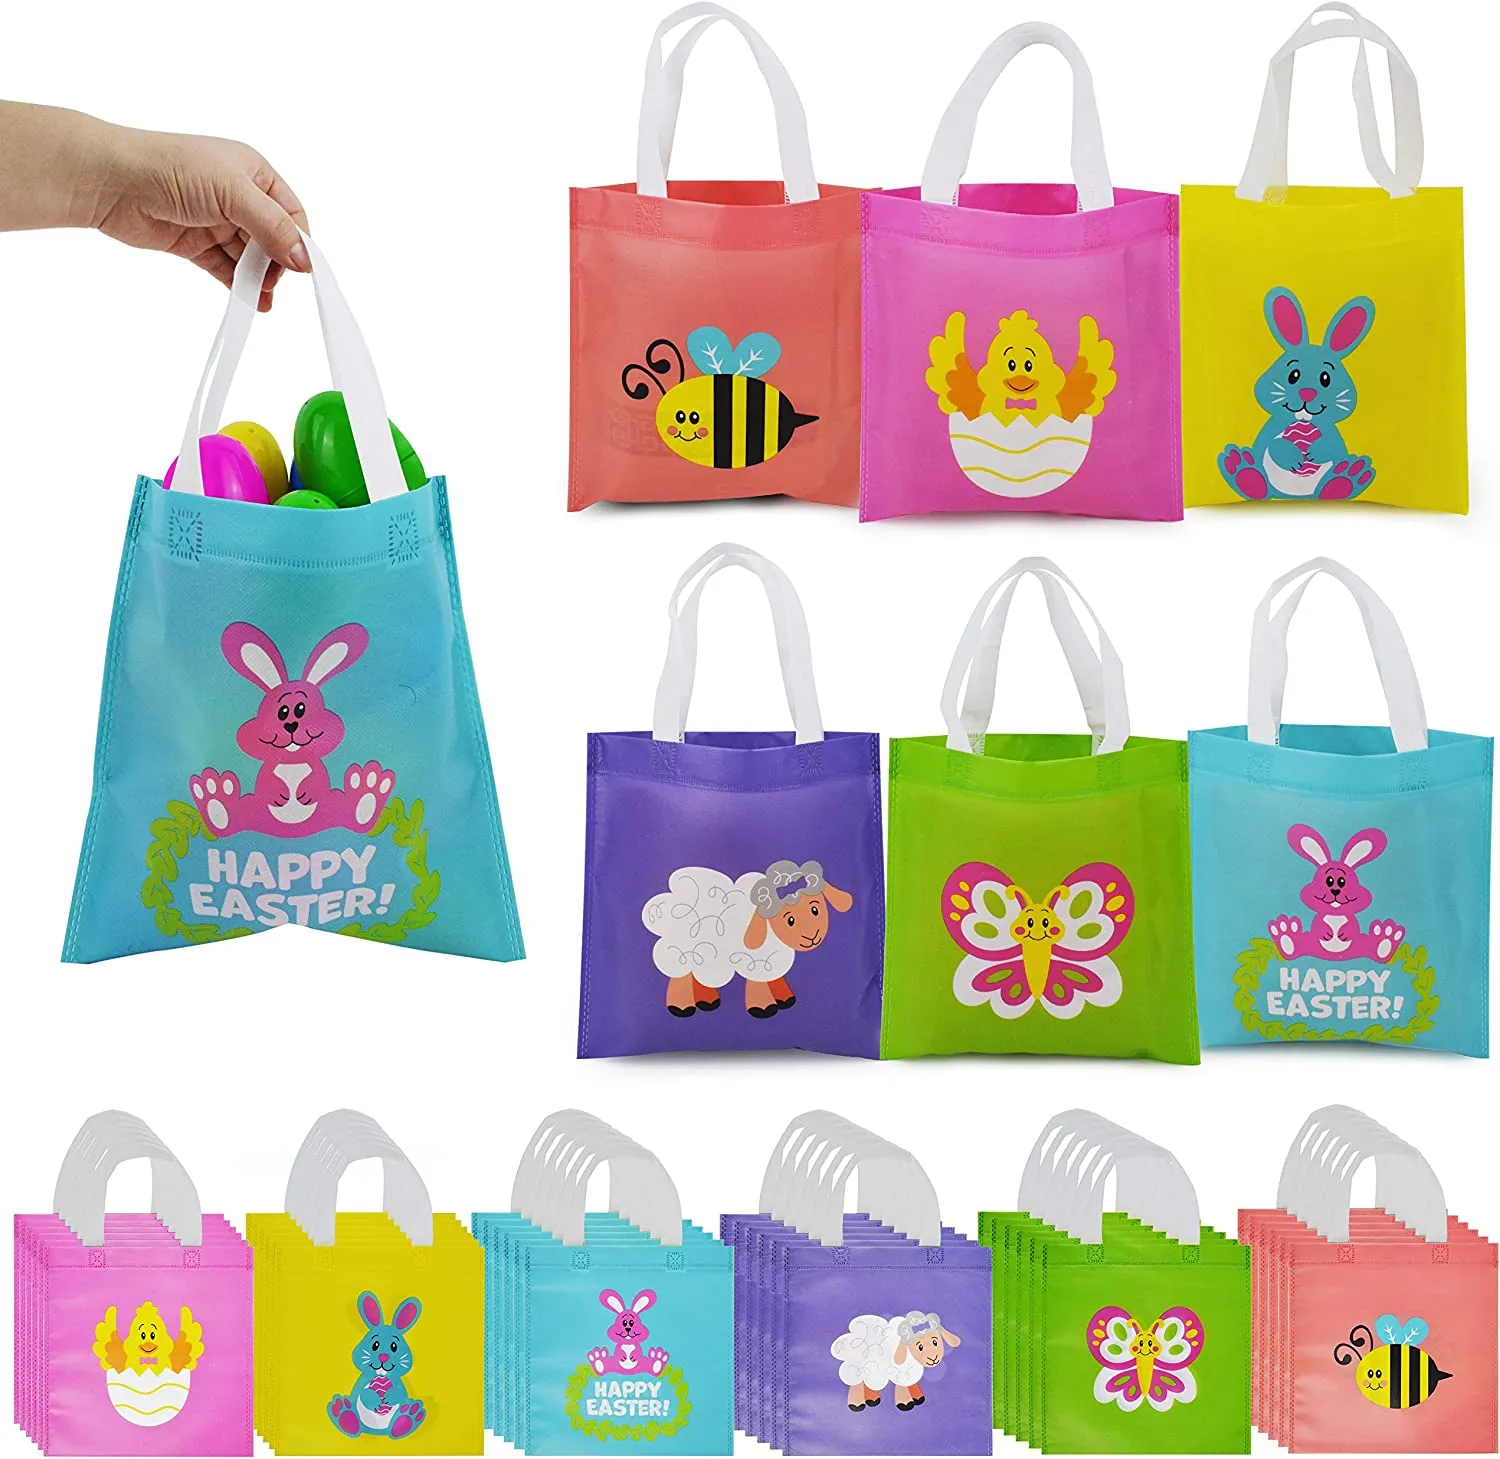 You are currently viewing Easter Basket Ideas for All Ages: From Kids to Adults